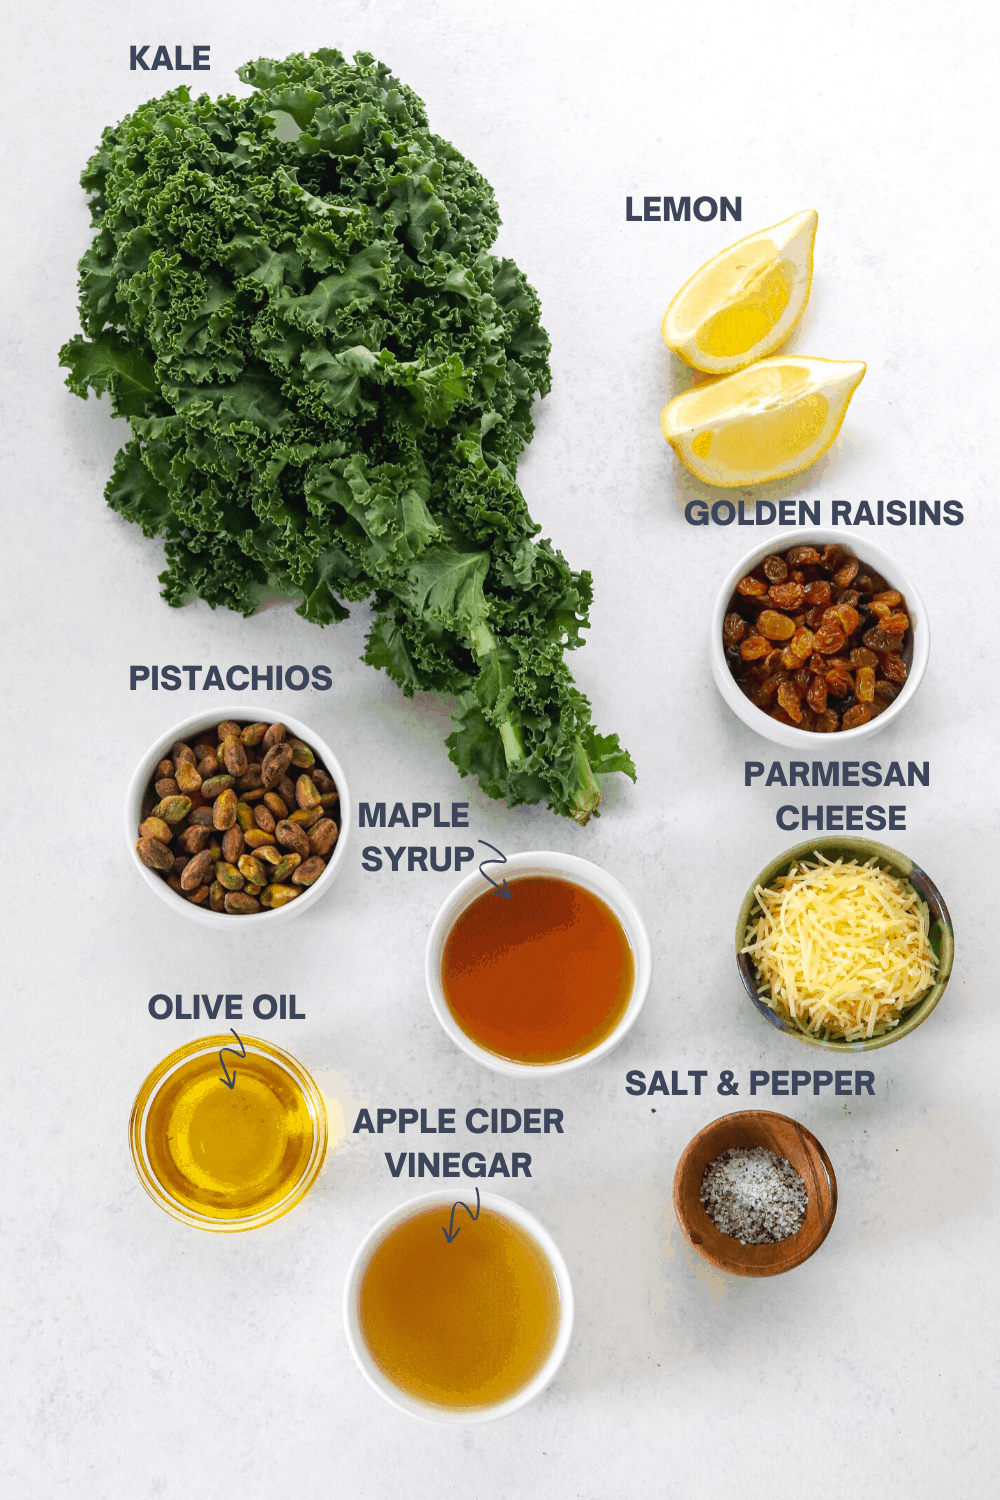 Kale, lemon, bowl of nuts, bowl of raisins, oil and vinegar on a white surface with labels over the top of each ingredient. 